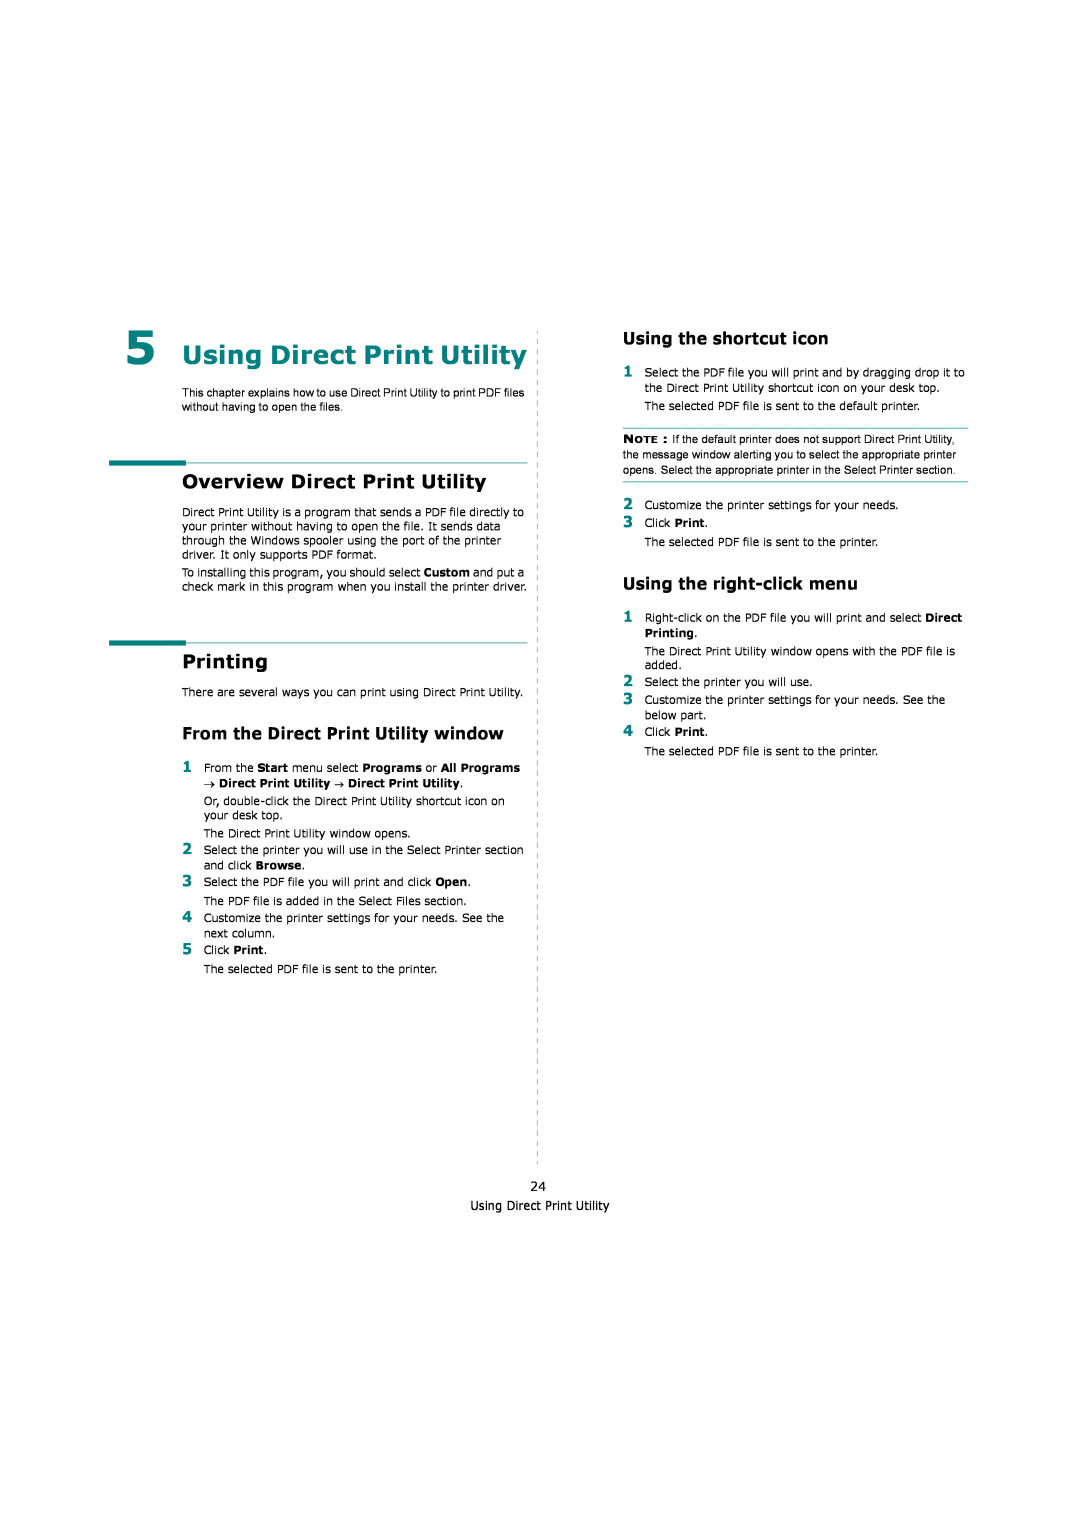 Samsung ML-4550 Using Direct Print Utility, Overview Direct Print Utility, Printing, From the Direct Print Utility window 